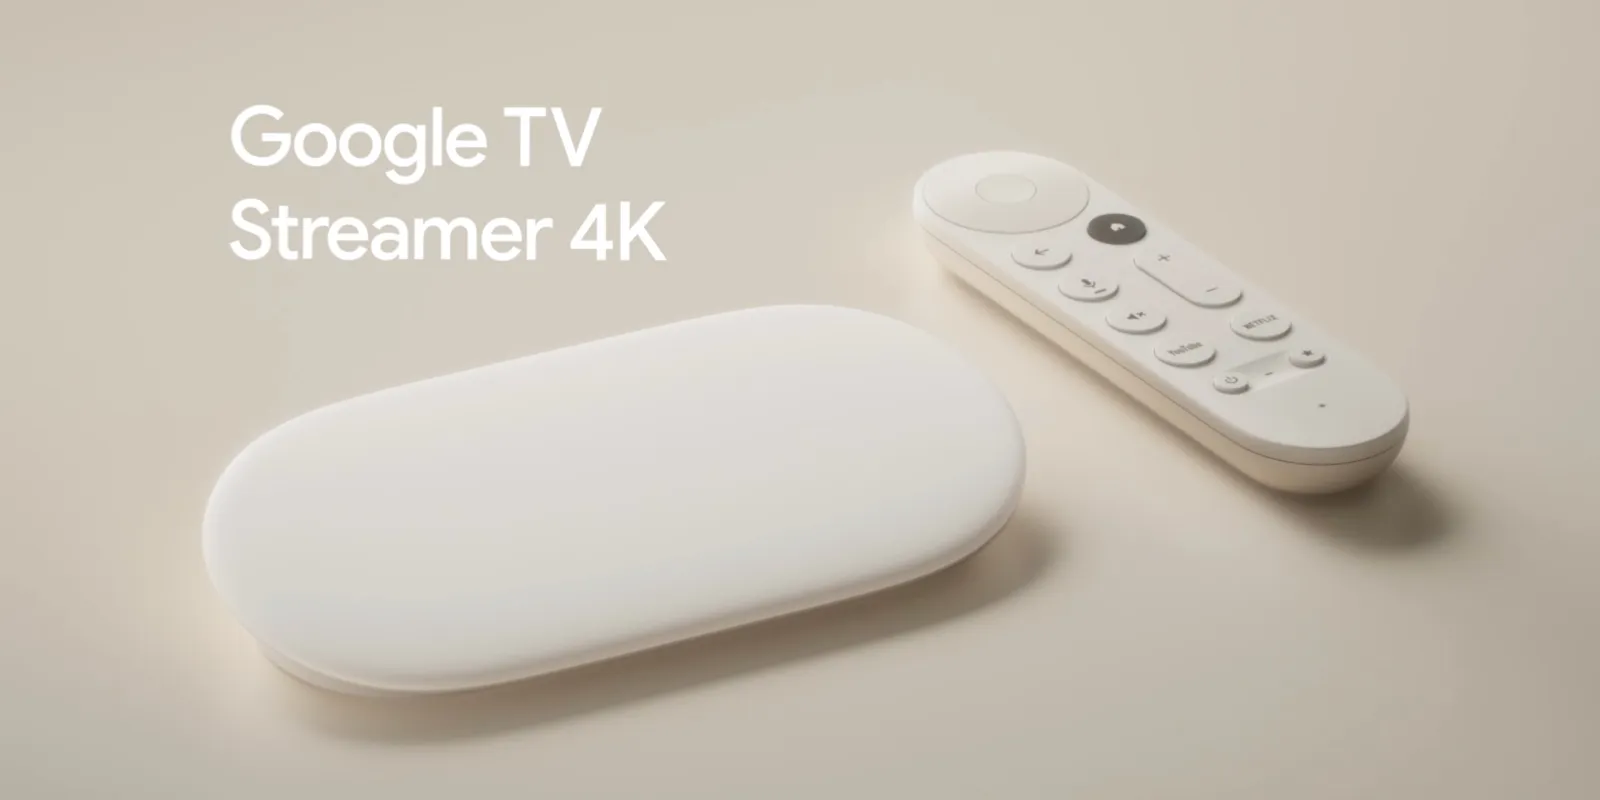 Google unveils new Google TV Streamer: more powerful, with updated design and smart home features